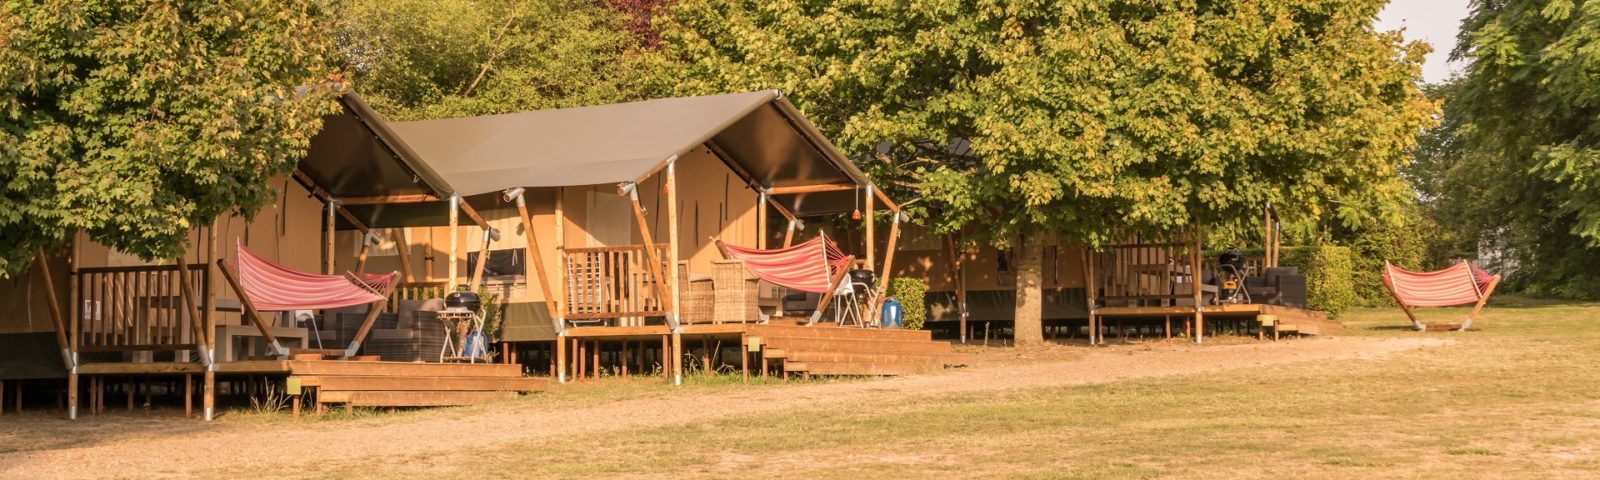 Glamping in Poitou-Charentes, France